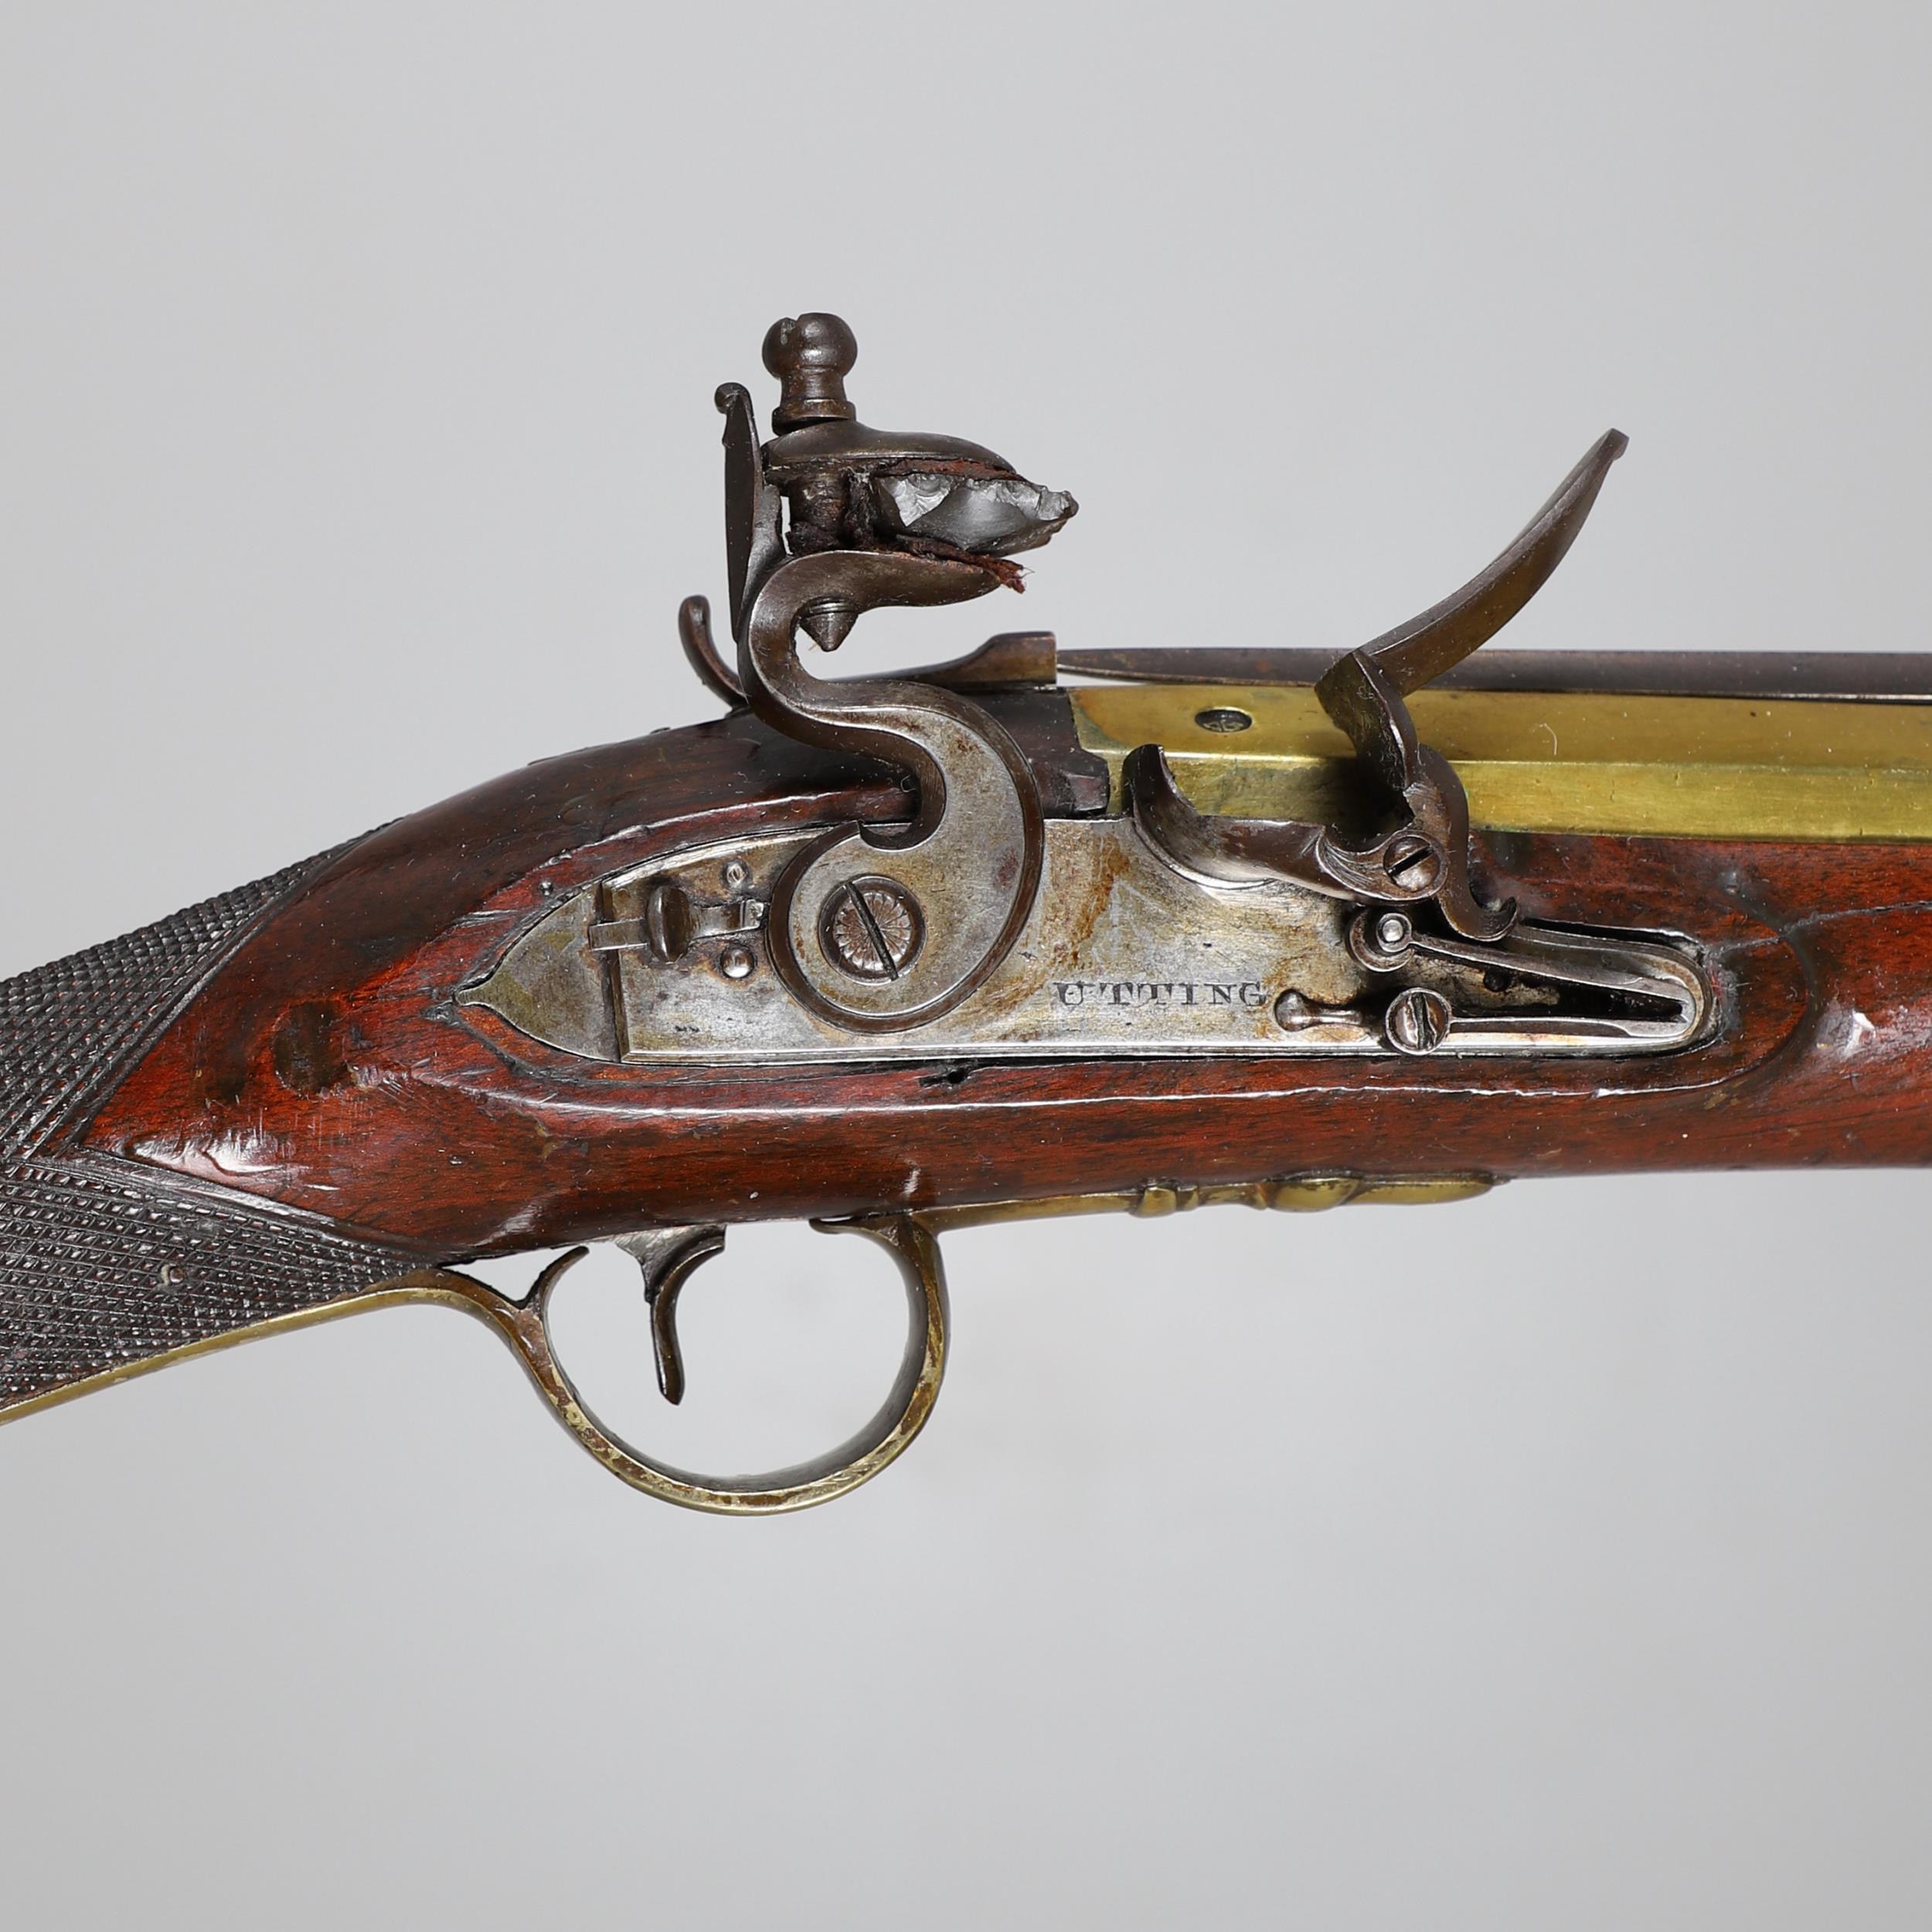 AN EARLY 19TH CENTURY BLUNDERBUSS MARKED FOR UTTING OF LONDON.